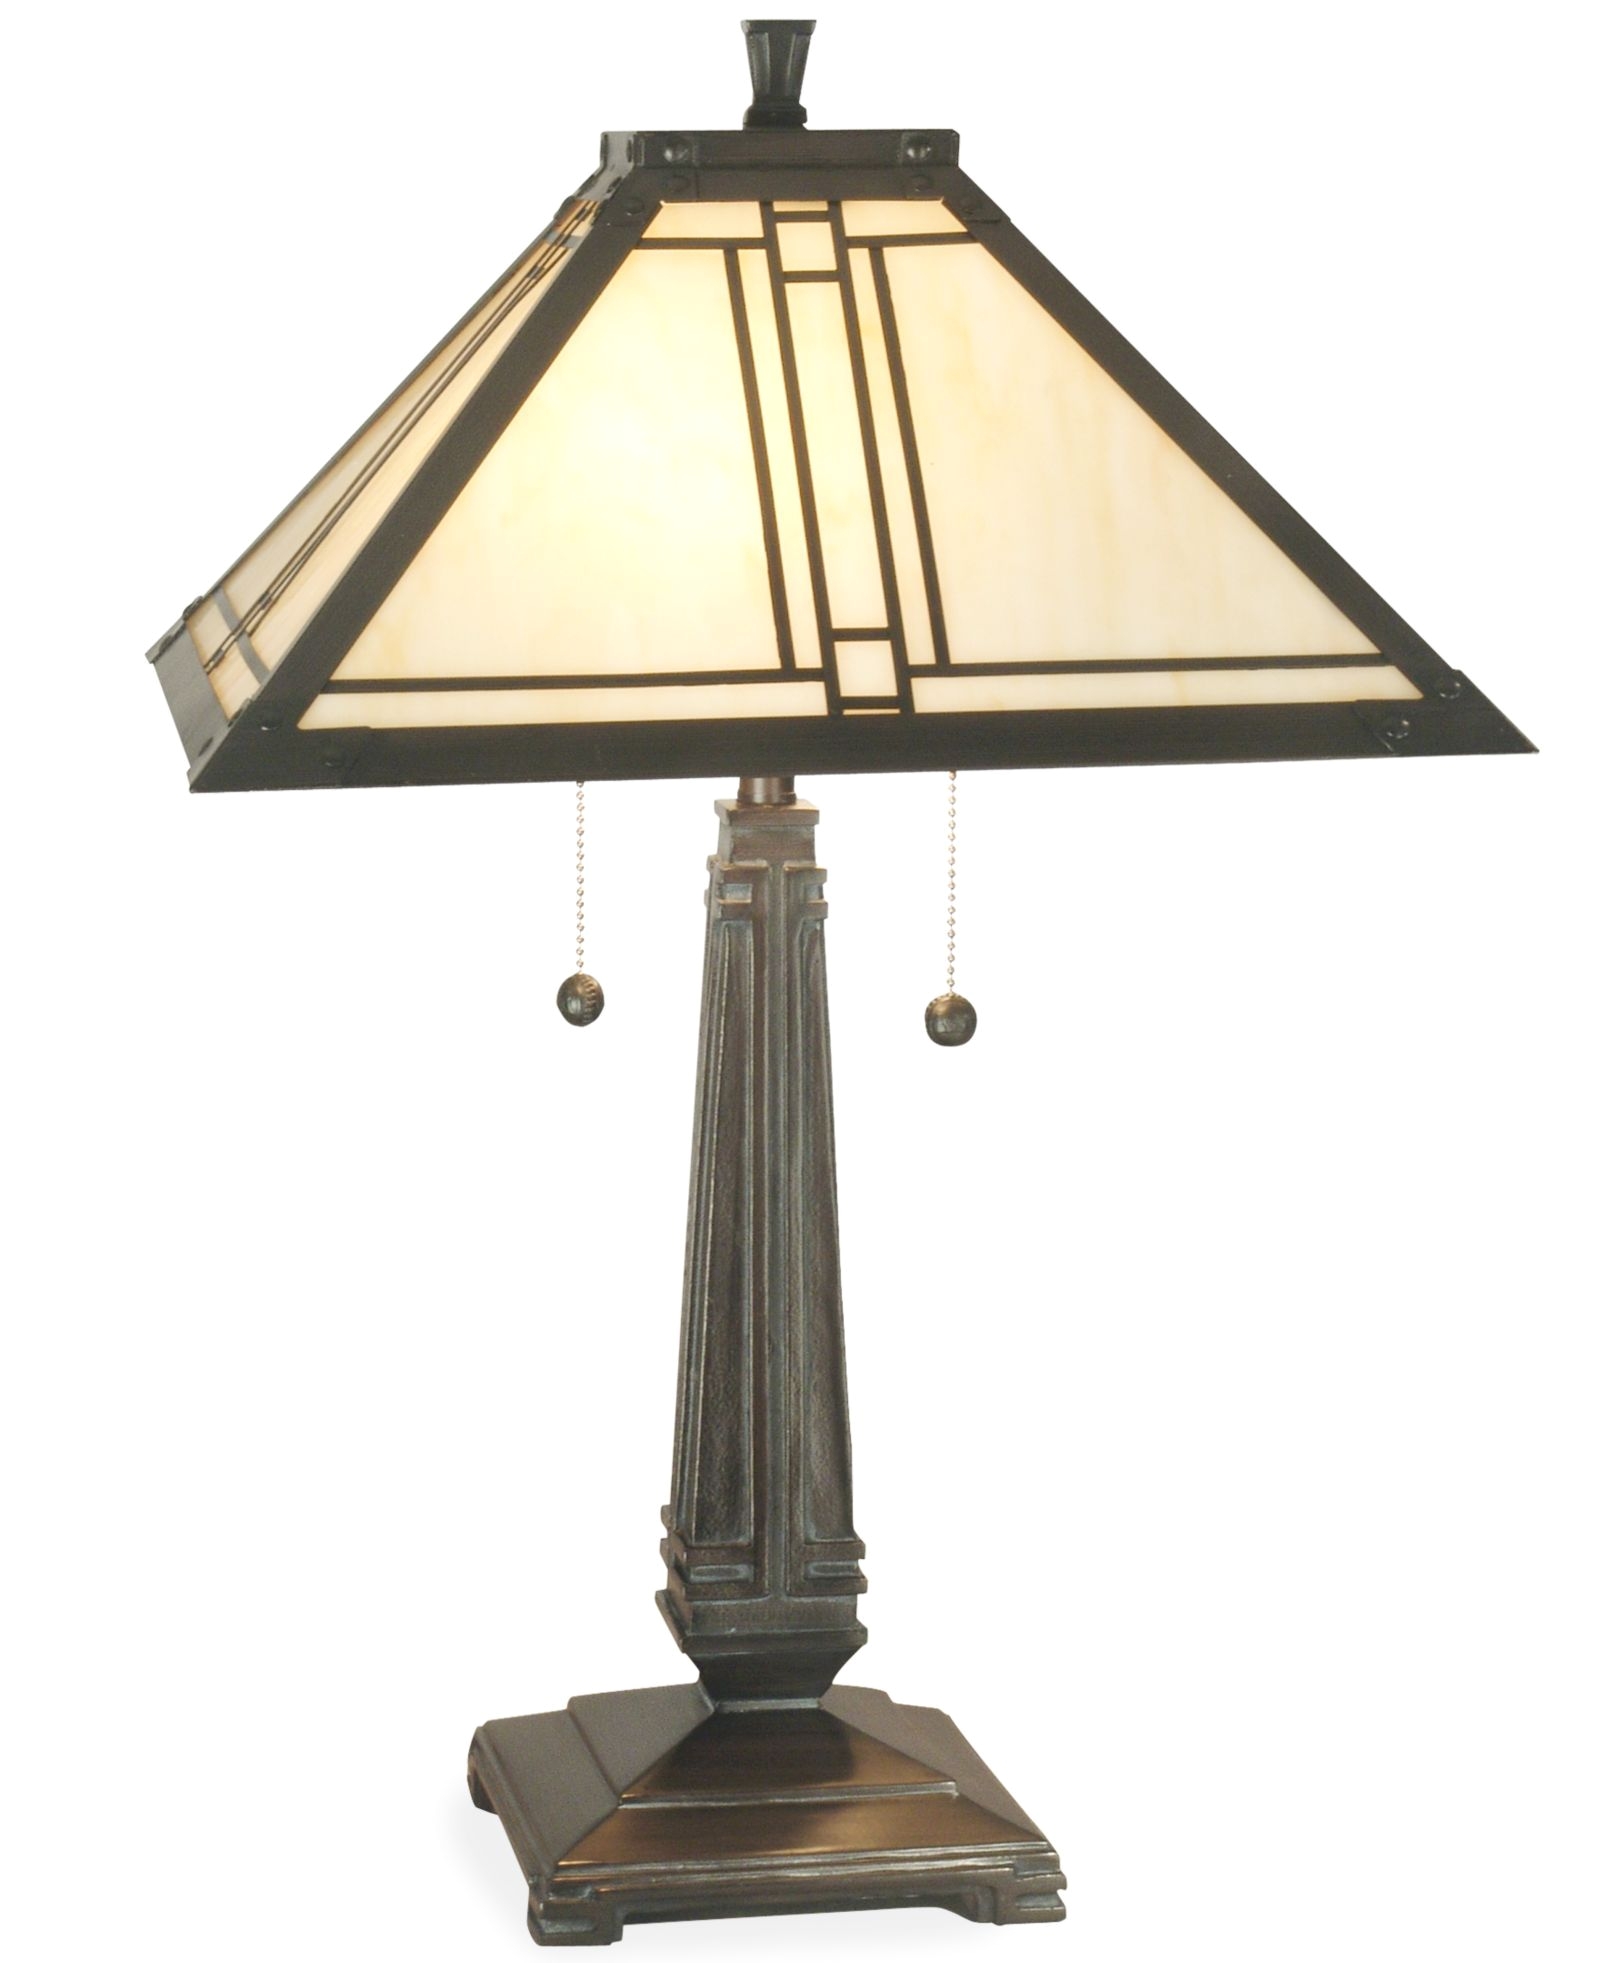 Dale Tiffany Lamp Replacement Parts Dale Tiffany Style Lined Mission Table Lamp Decorating Ideas